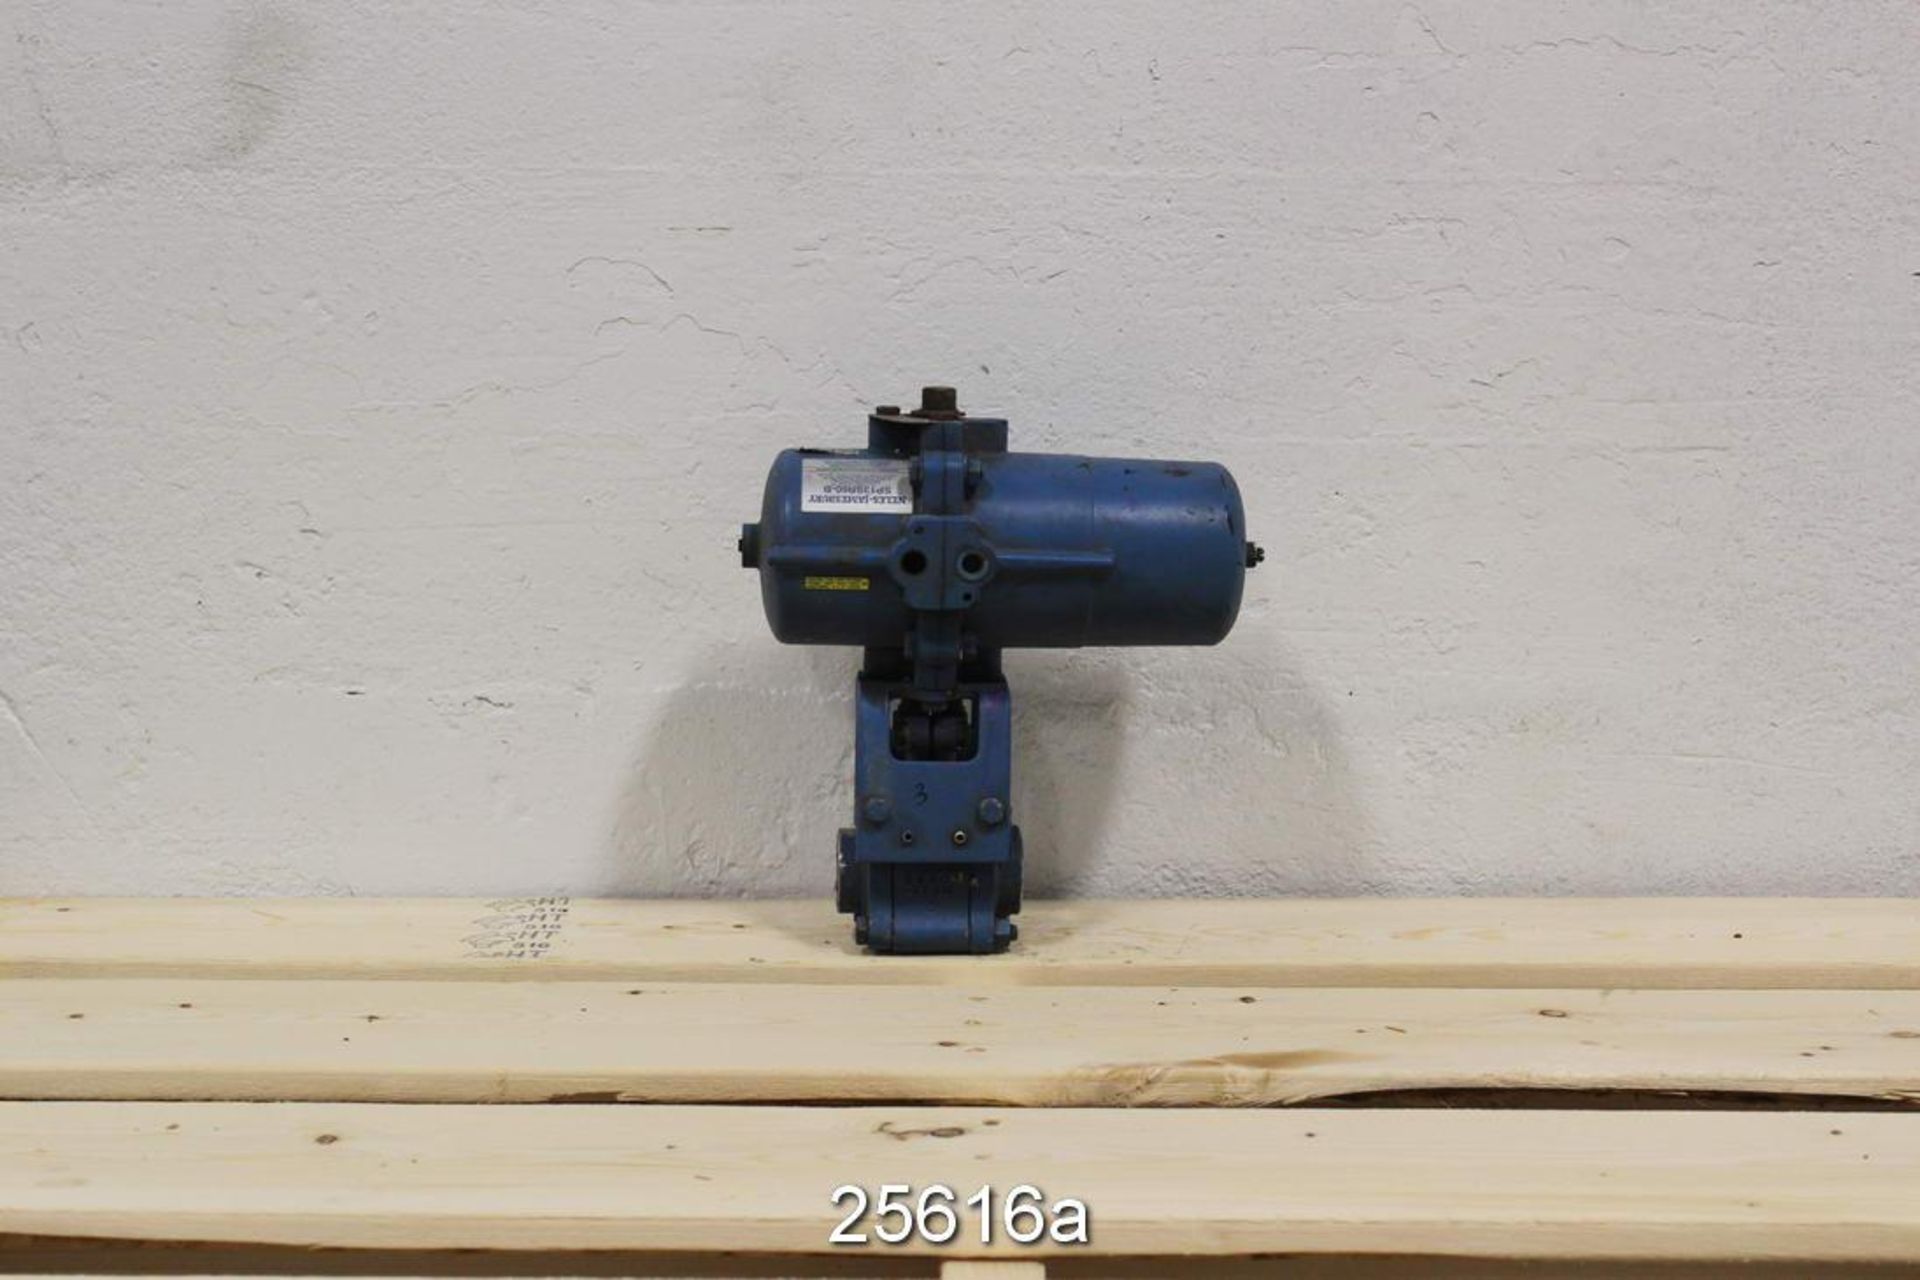 Neles Jamesbury 14A3600TT1 1" Air Operated Ball Valve, 316 Stainless Steel Body, 316 Stainless Steel